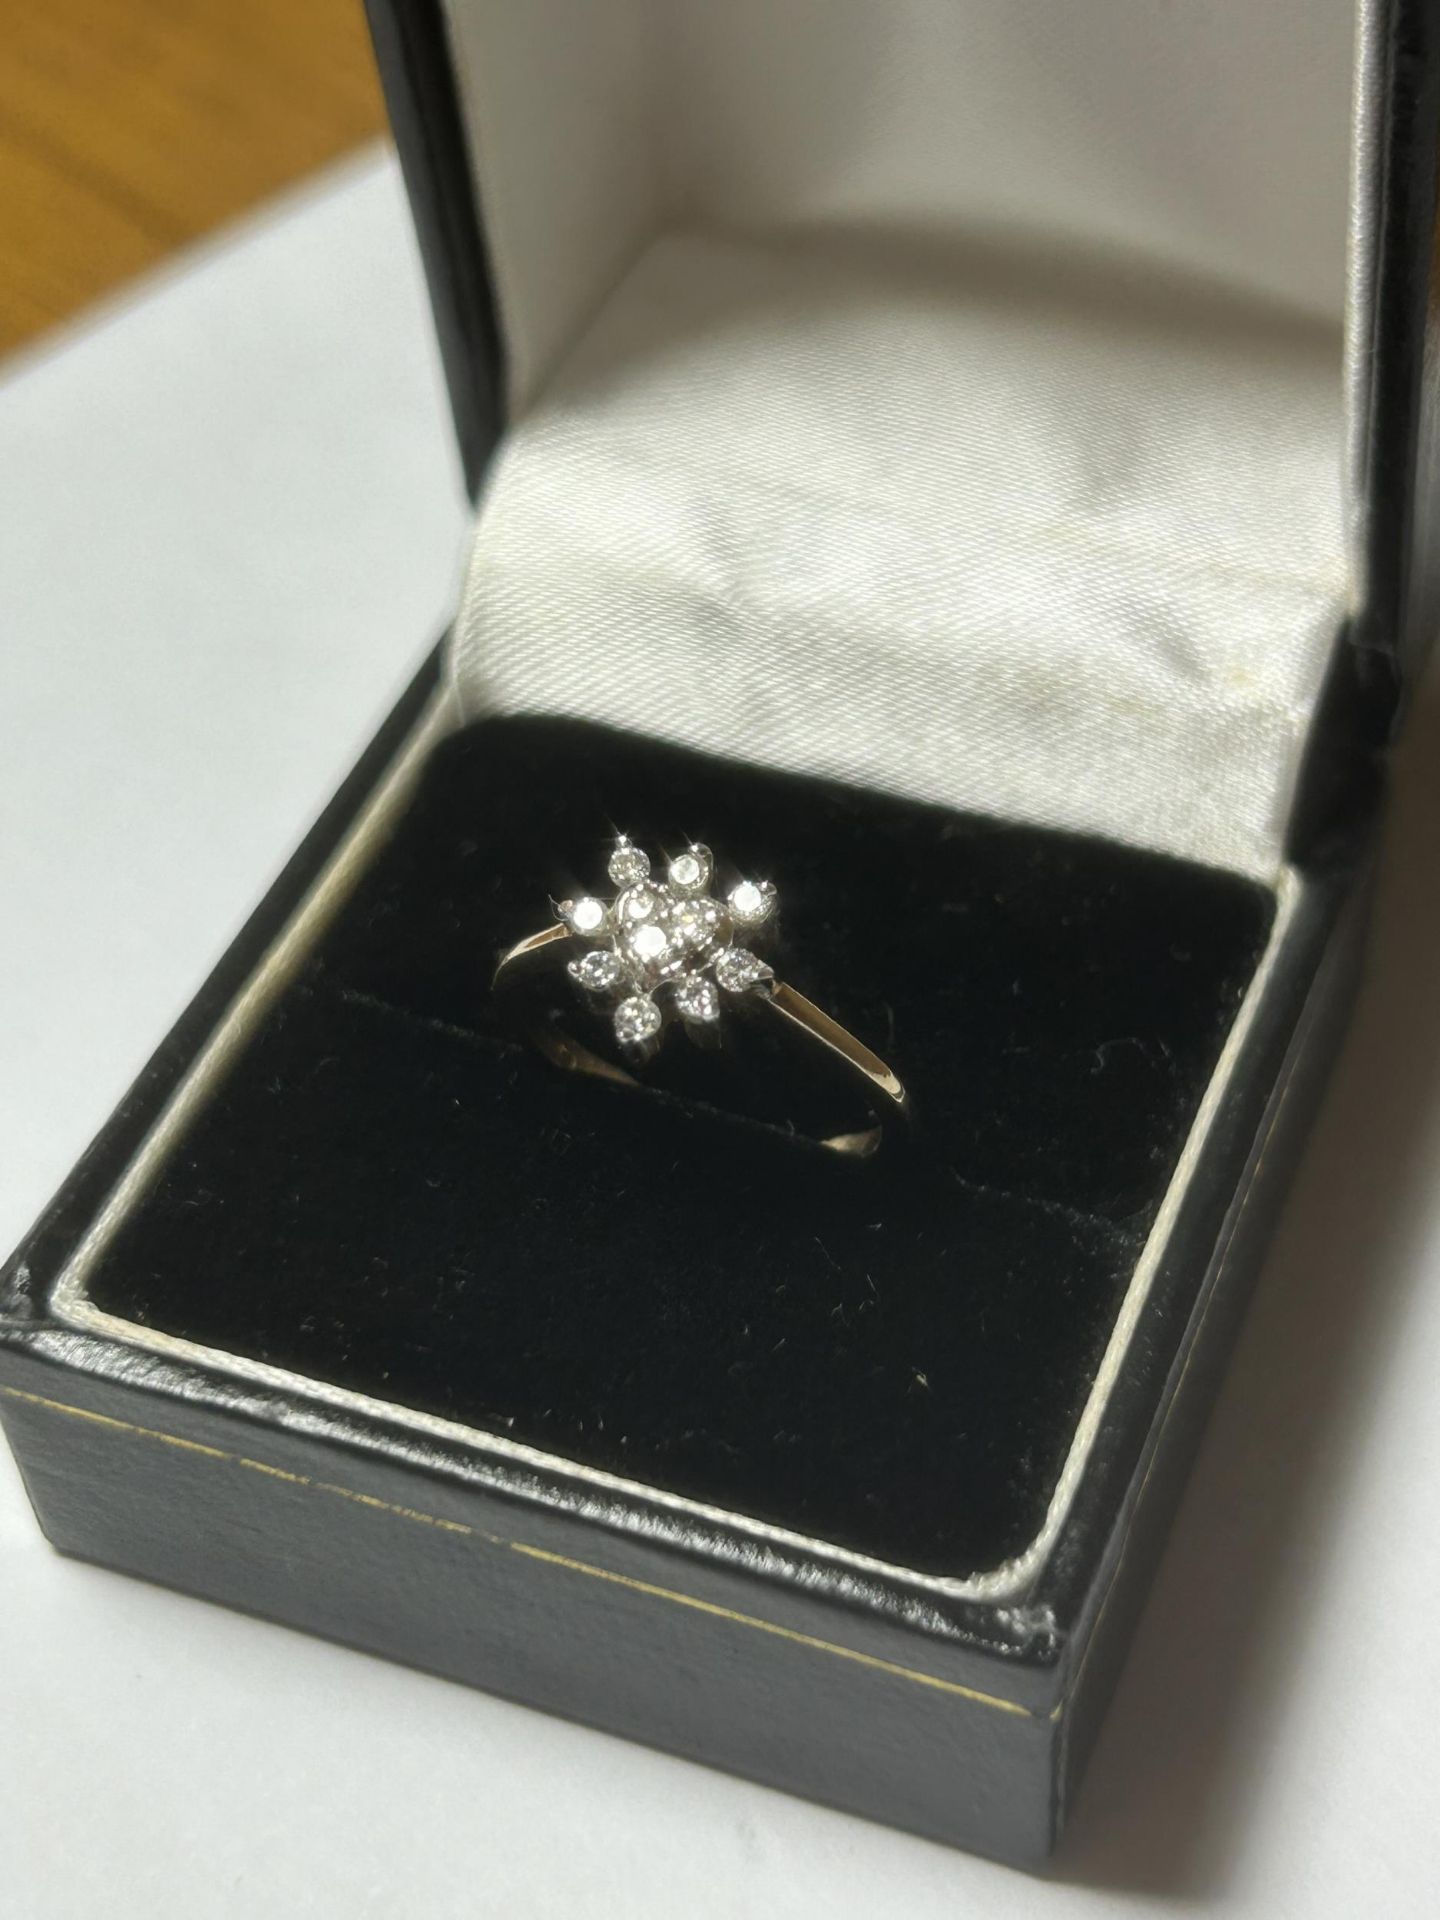 A 9CT YELLOW GOLD DAISY DESIGN RING, WITH CUBIC ZIRCONIAS, SIZE J 1/2 COMPLETE WITH PRESENTATION BOX - Image 2 of 3